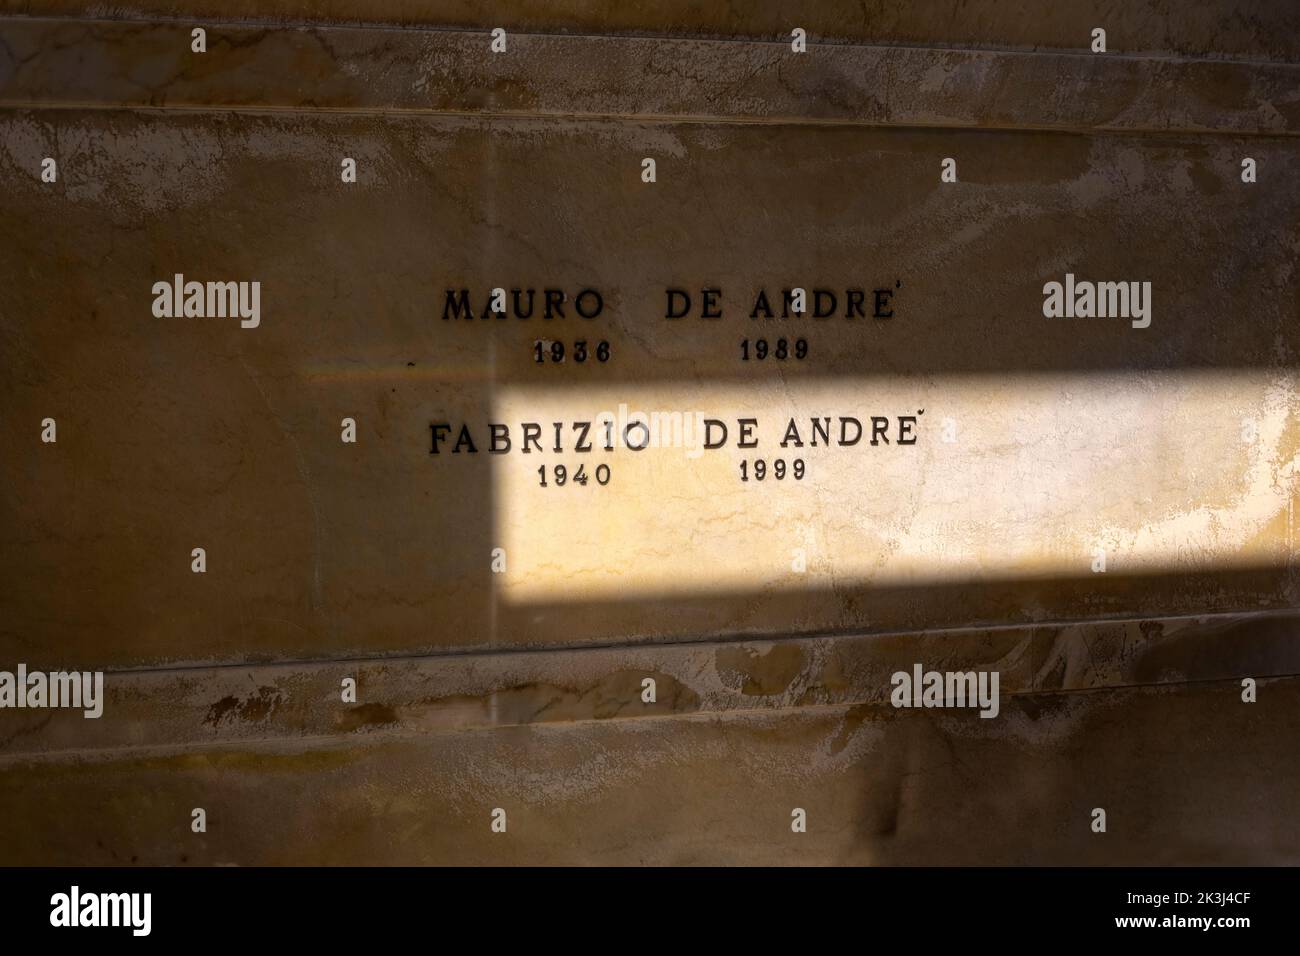 GENOA, ITALY, MAY 9, 2022 - The Inner of Fabrizio De Andrè's tomb, one of the most famous Italian songwriters, in Genoa Monumental Cemetery of Genoa, Stock Photo